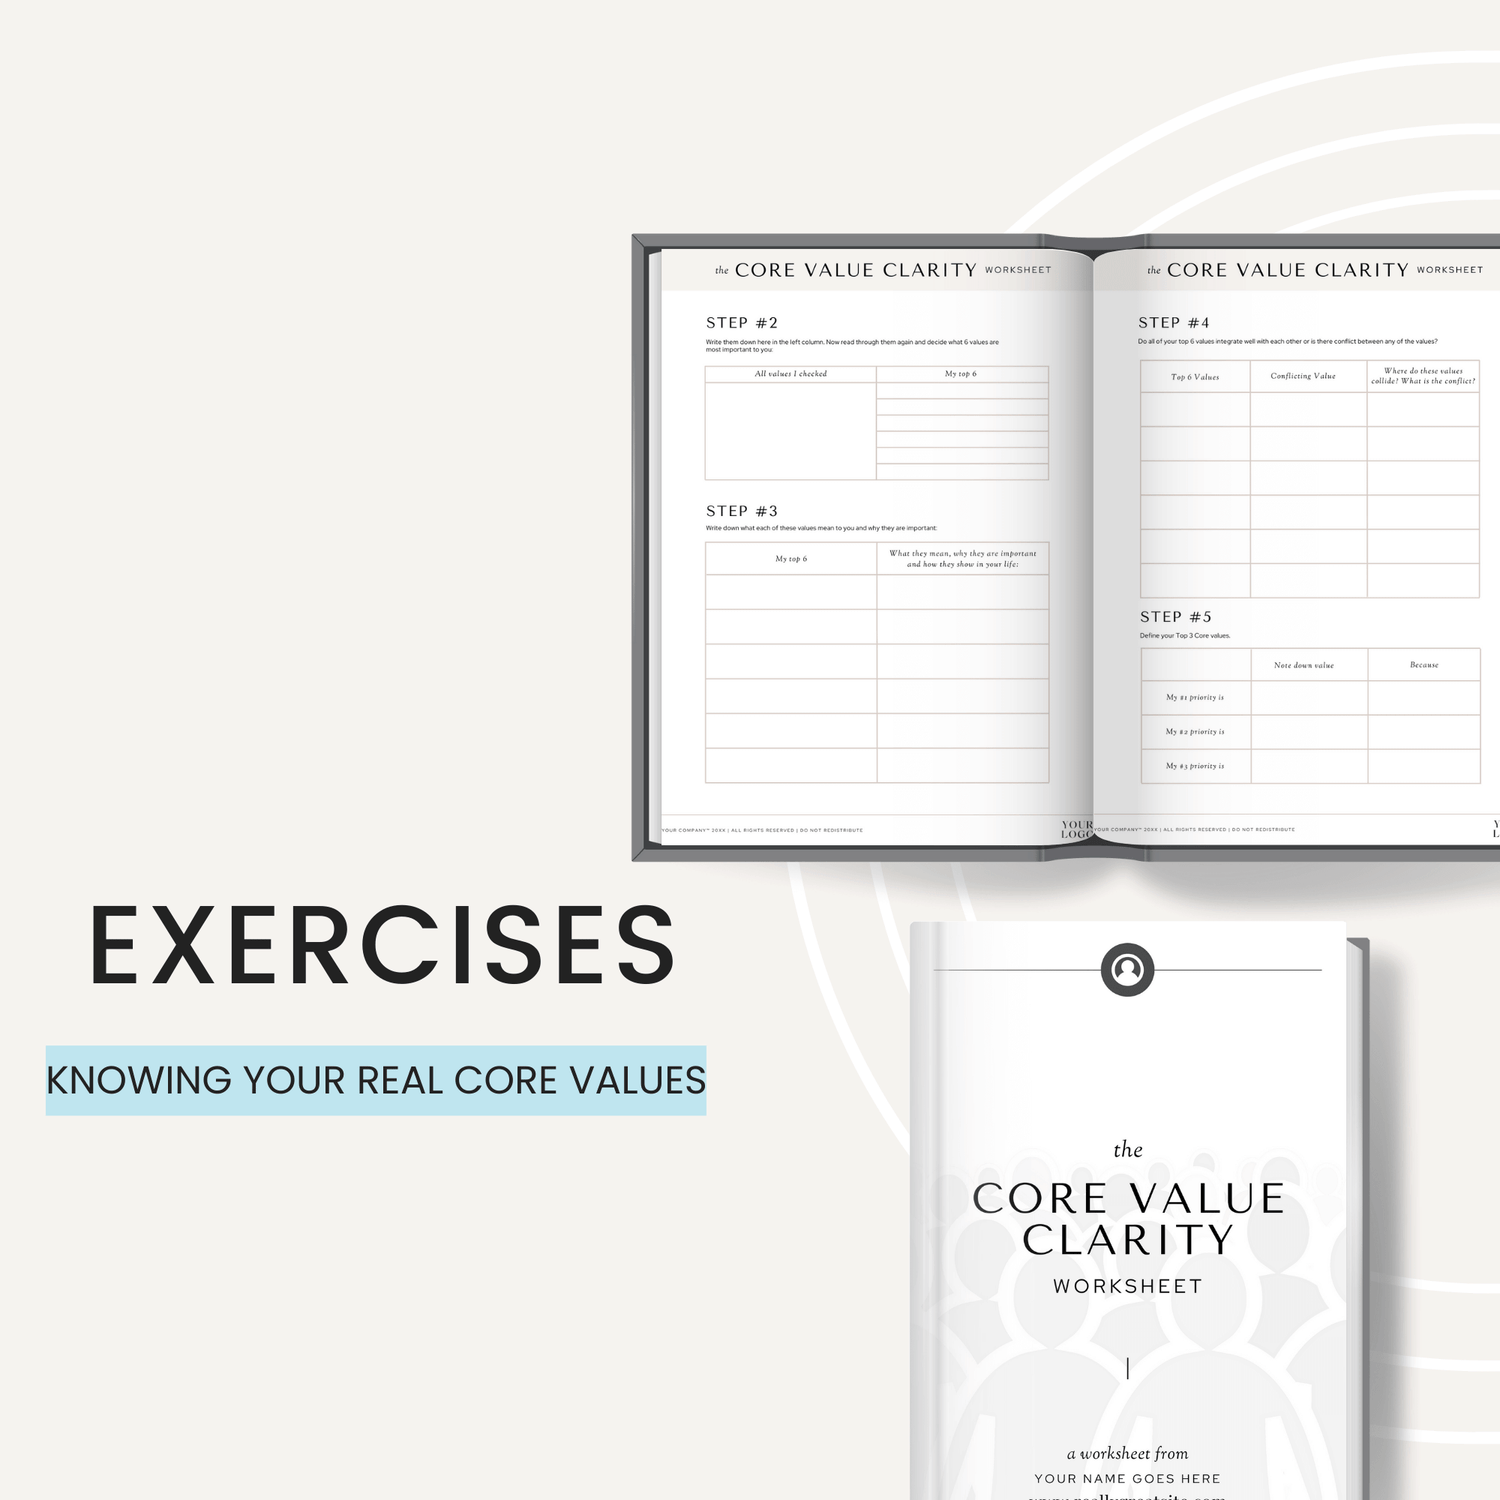 Core_Value_Clarity_Worksheet_Exercises_Knowing_Your_Real_Core_Values